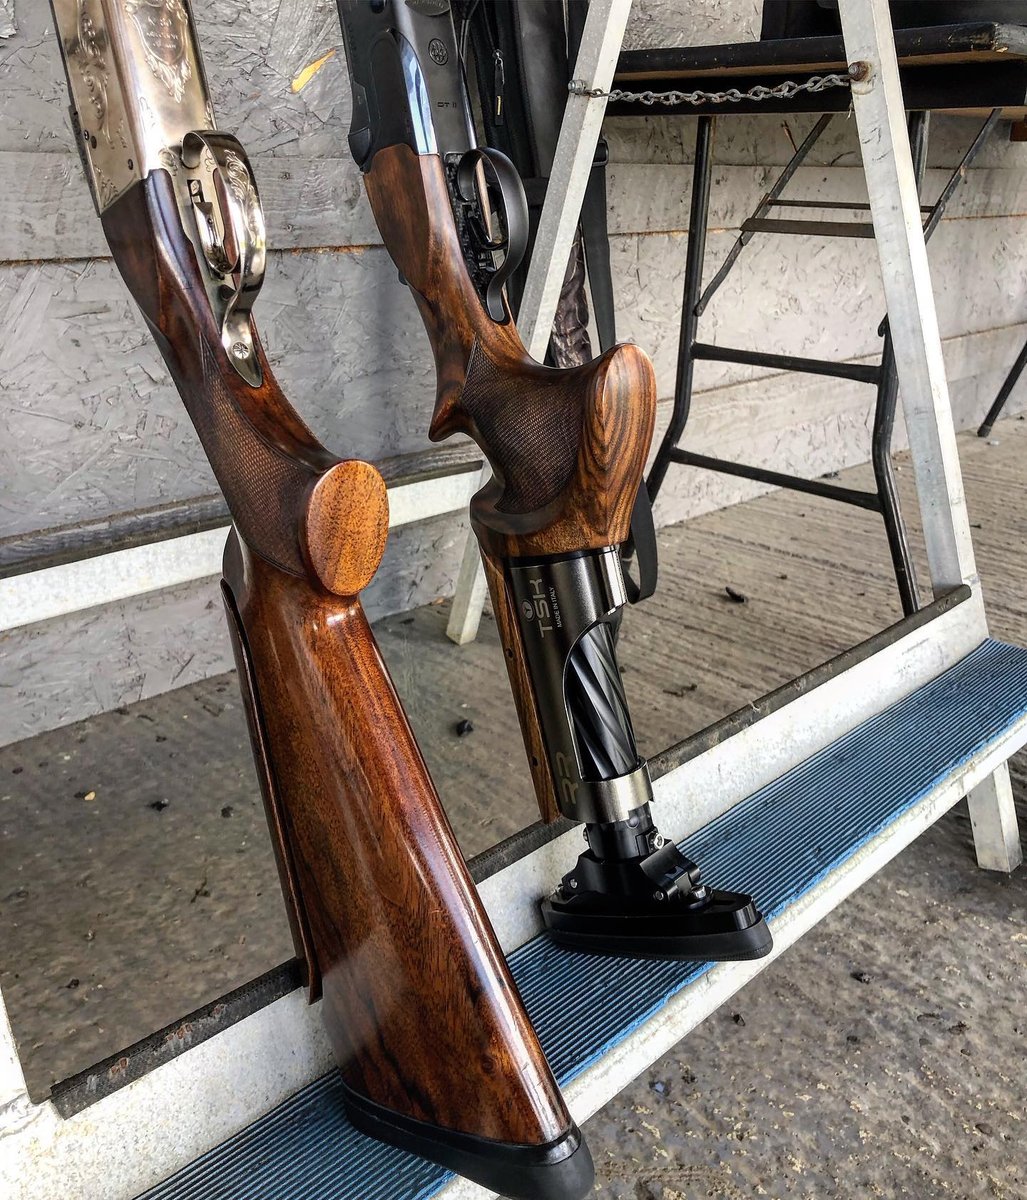 Wooden stock or futuristic stock, which do you prefer? ⁣
⁣
( Photo from @seanferries )⁣

#beretta #berettatribe #clayshooting #clayshoot #claypigeon #claypigeonshooting #dt11 #cpsa #UKshooters #shotty #doublebarrel #browning⁣